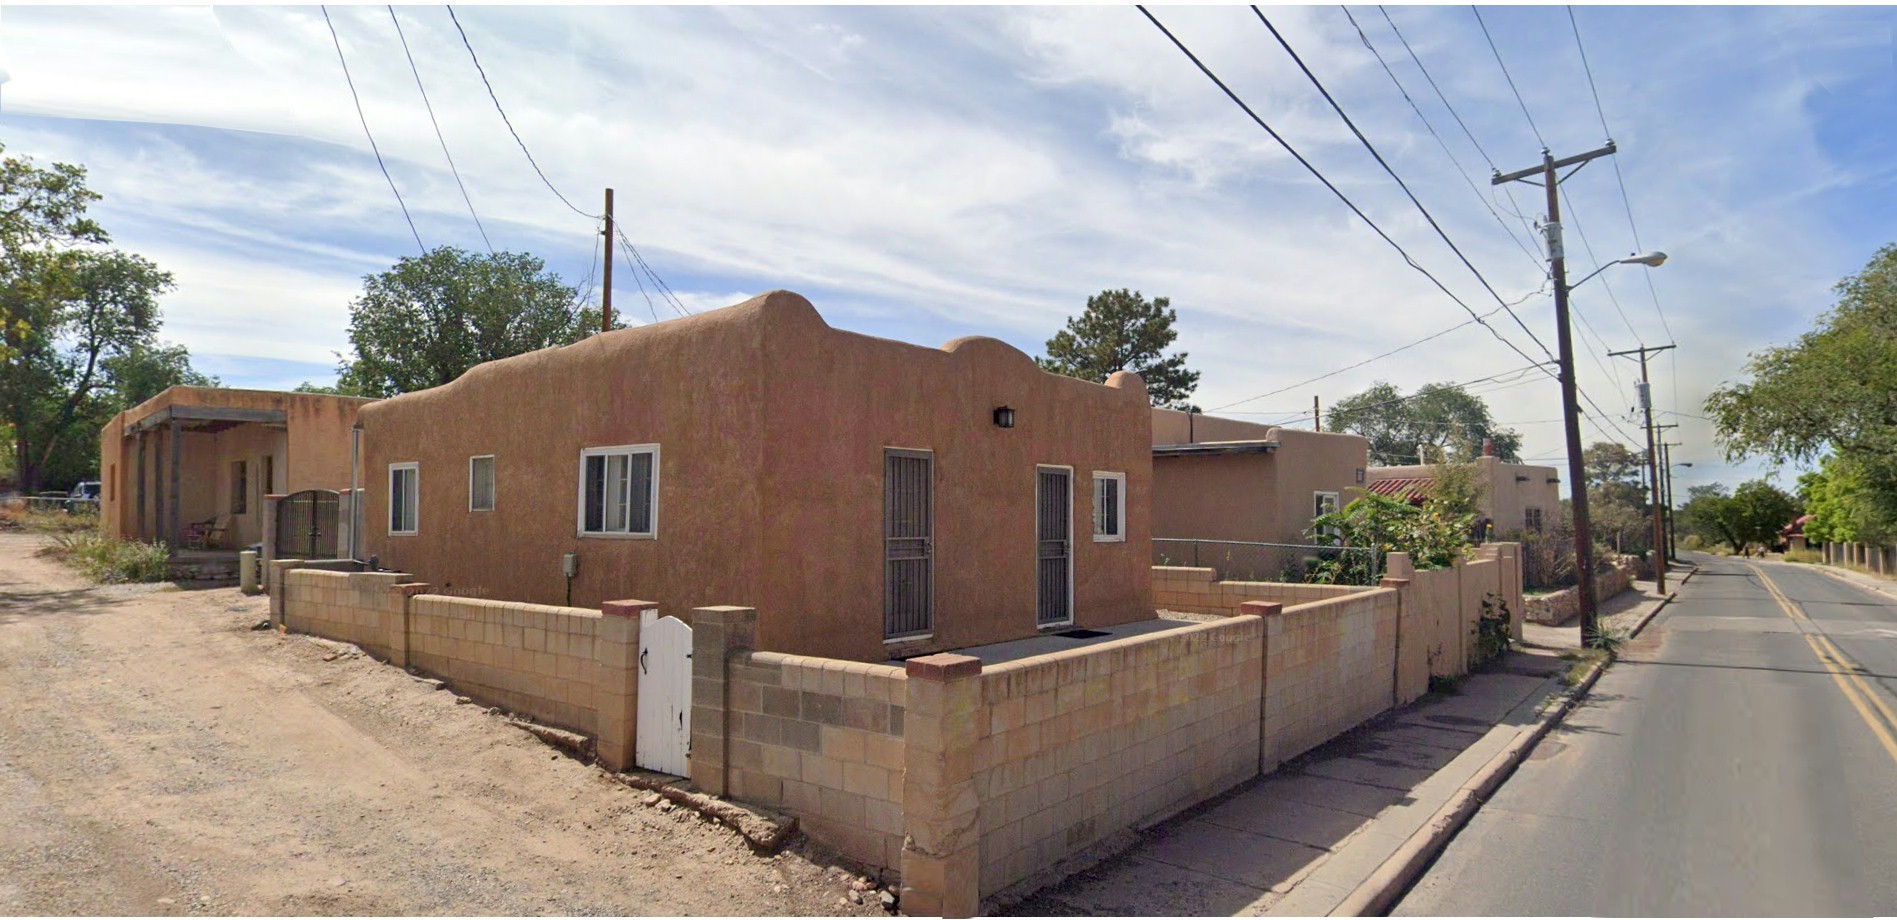 730 Agua Fria Street, Santa Fe, New Mexico 87501, 2 Bedrooms Bedrooms, ,1 BathroomBathrooms,Residential,For Sale,730 Agua Fria Street,202400342